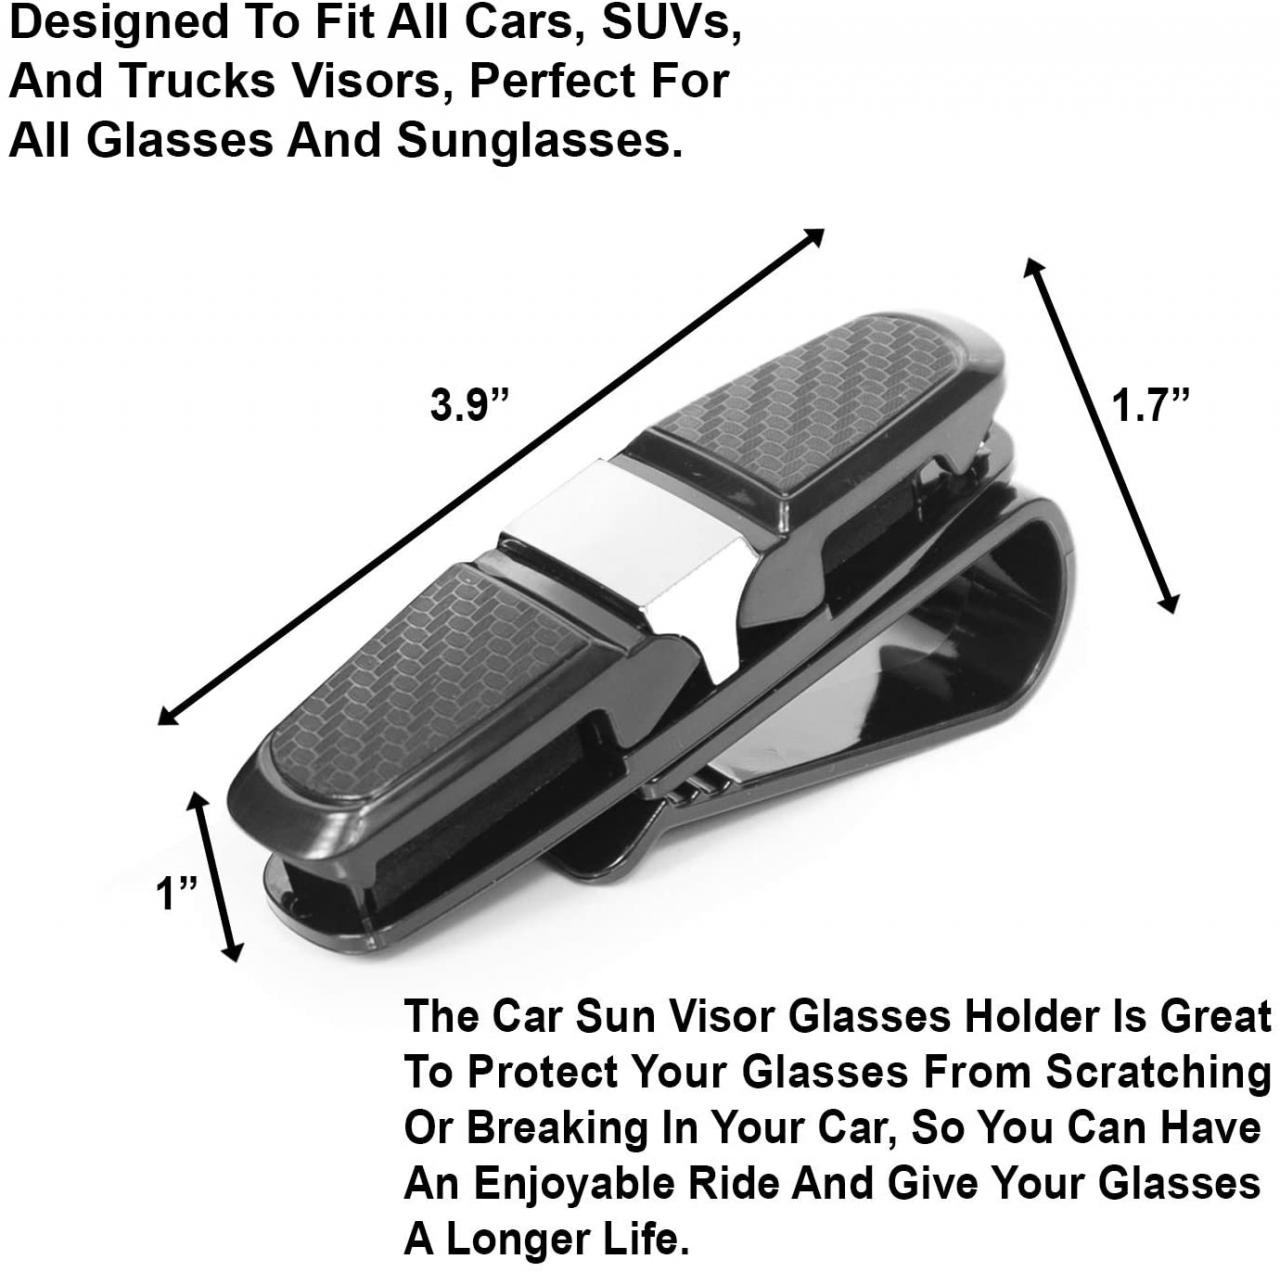 The Best Sunglass Holder for Cars (Review) in 2020 | Car Bibles